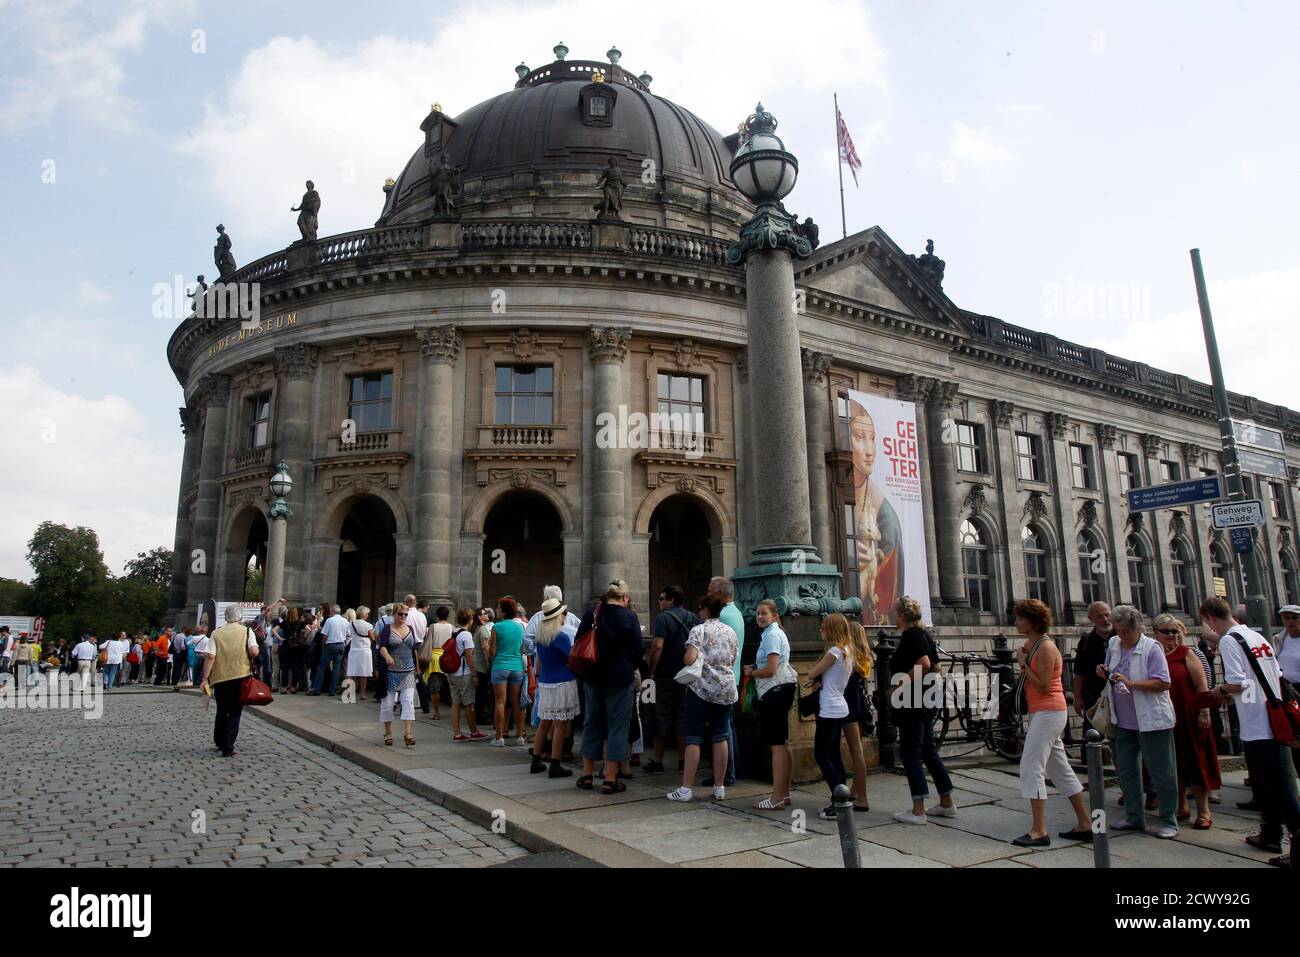 People queue at the ticket counters and main entrance to the Bode museum in Berlin August 25, 2011. Today the exhibition 'Gesichter der Renaissance' (Renaissance Faces) showing around 170 masterpieces of Italian portraitures opens to the public and runs till November 20 in the German capital.   REUTERS/Tobias Schwarz (GERMANY - Tags: ENTERTAINMENT CITYSCAPE) Stock Photo